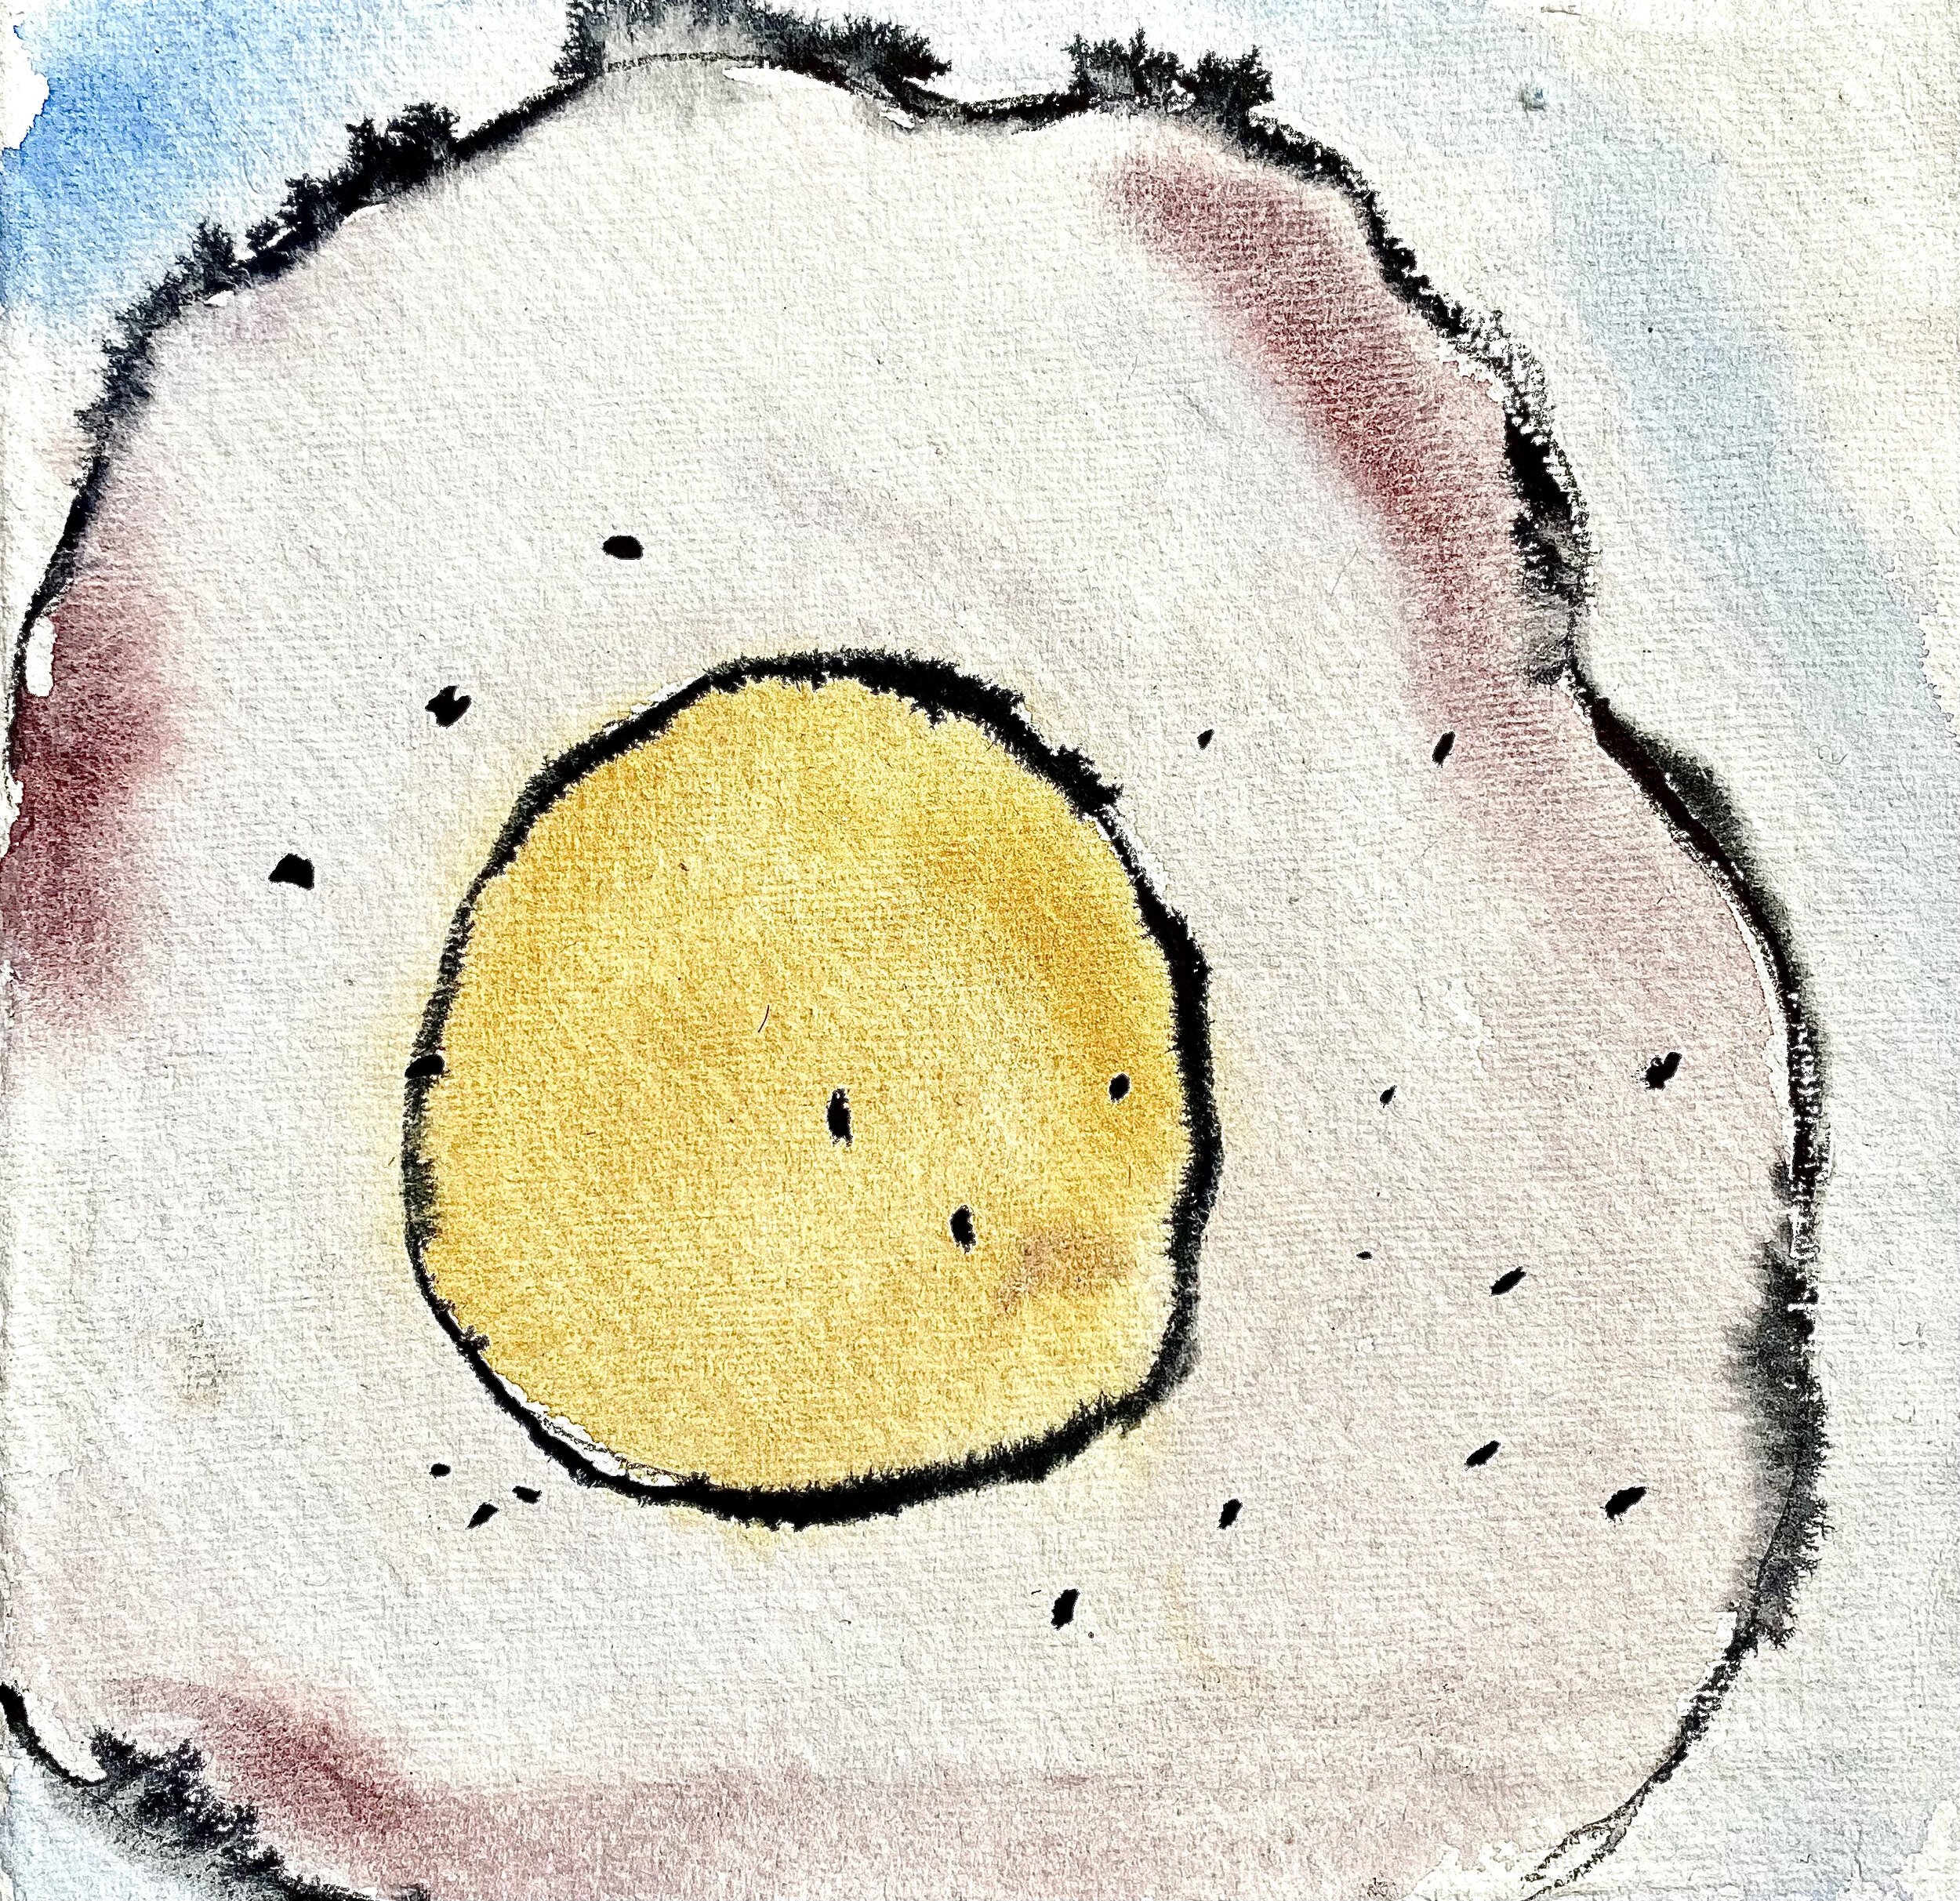 Fried+Egg+8%22+x+8.25%22+watercolor,+pencil+on+paper.jpg